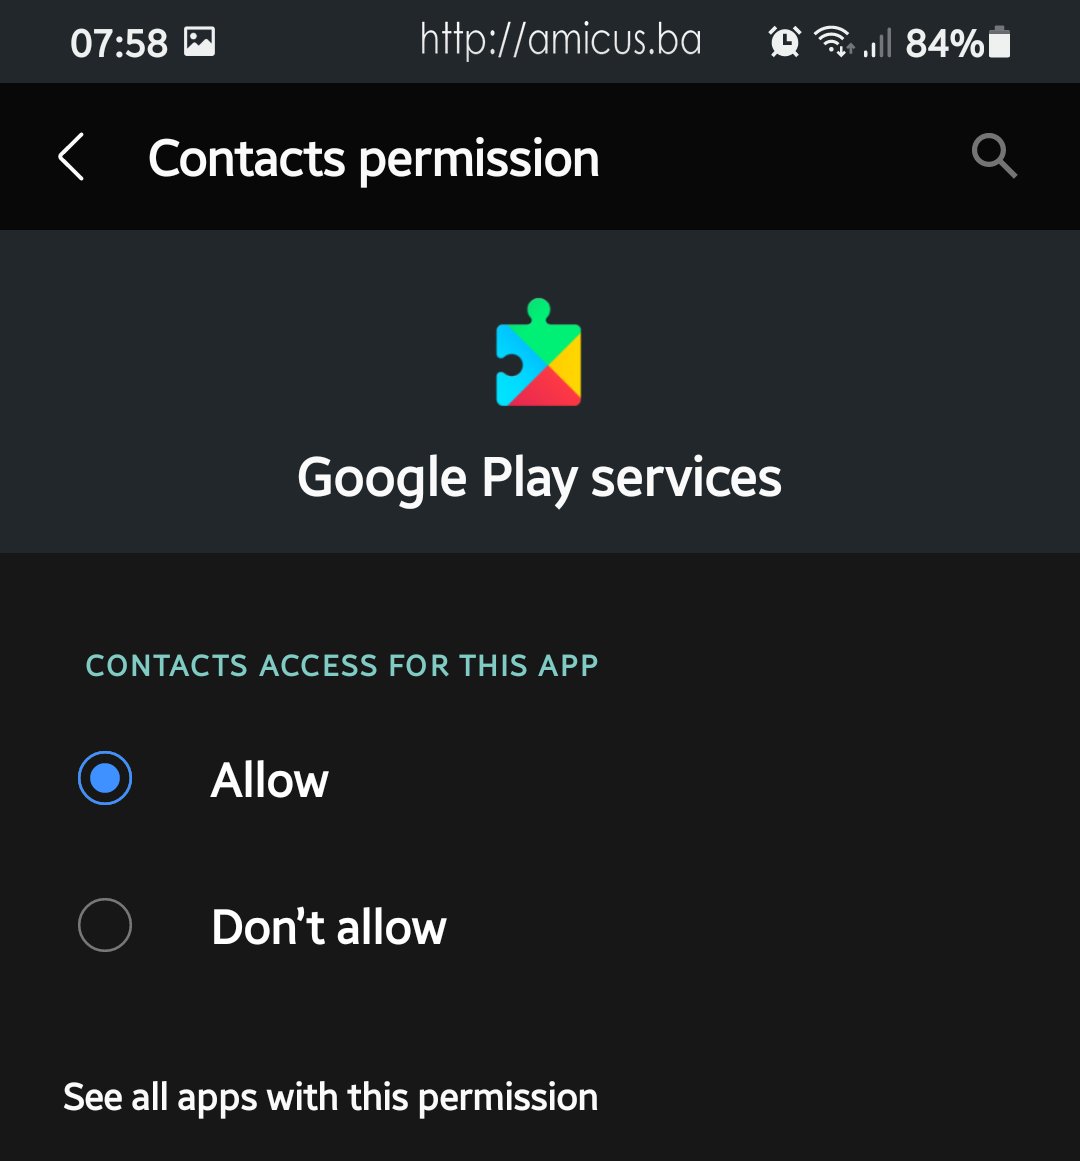 Google Play Services contacts permission